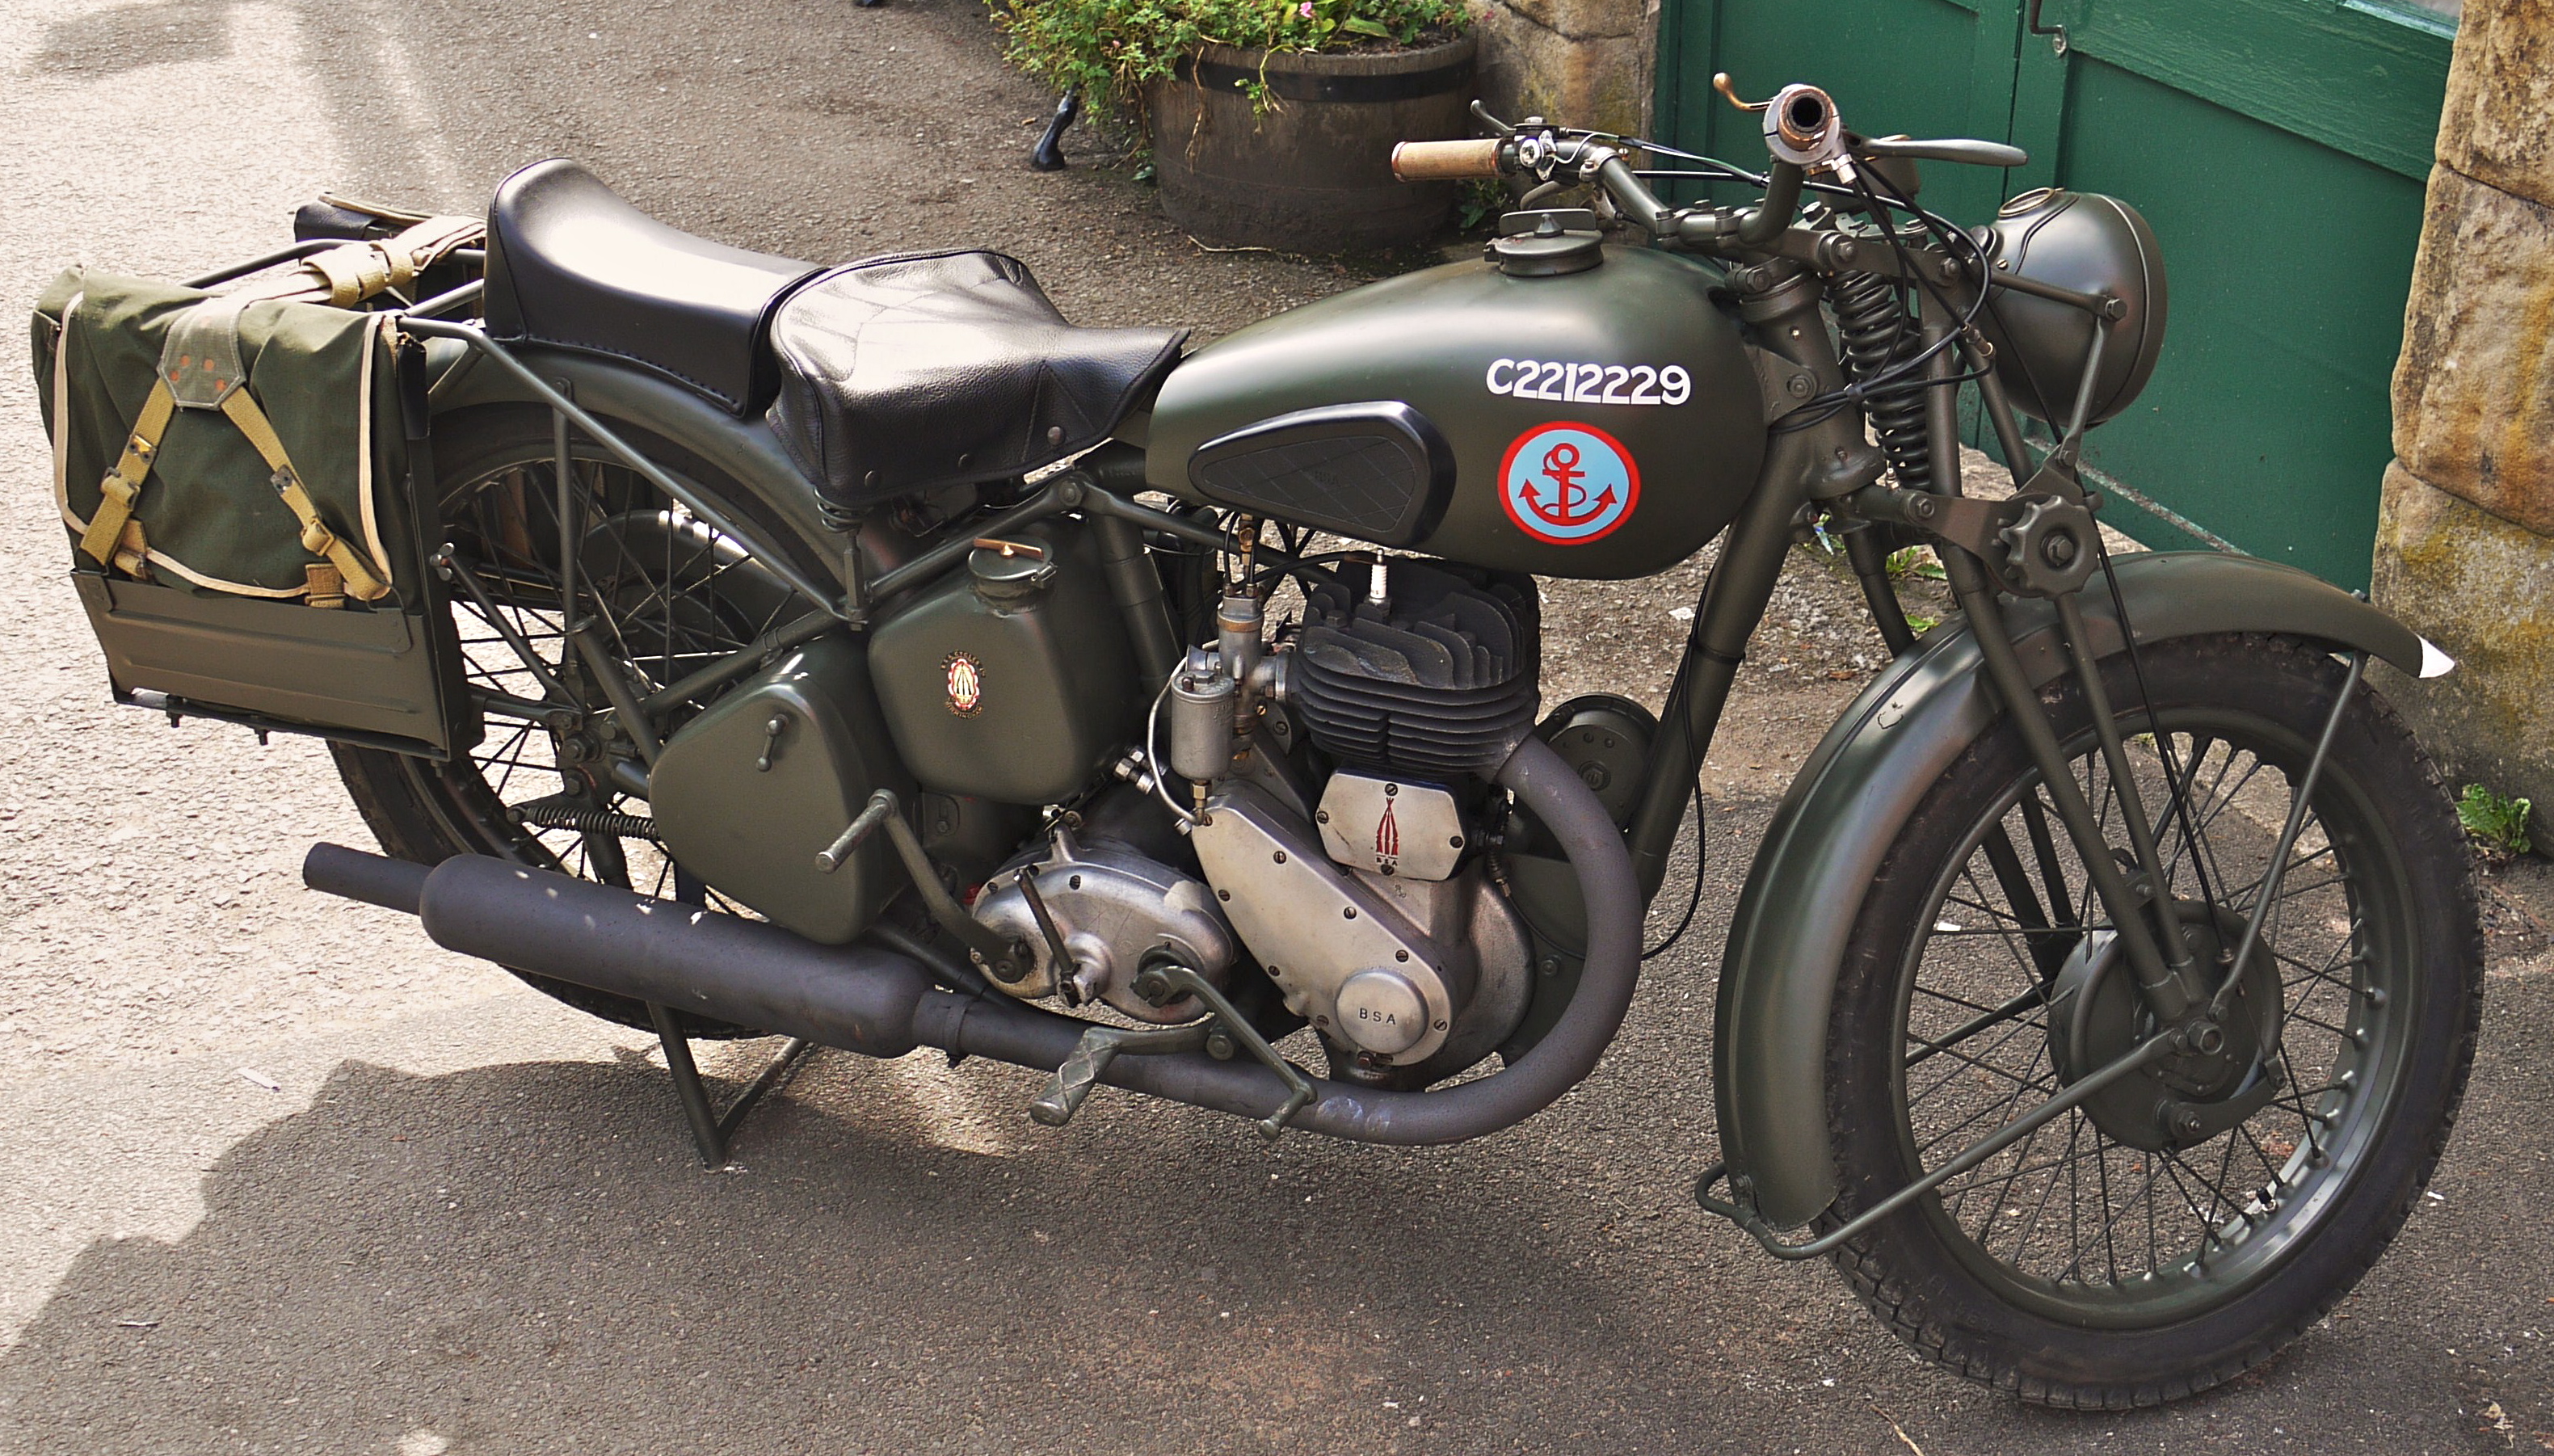 File:BSA Army Motorcycle - Flickr - mick - Lumix.jpg - Wikimedia Commons